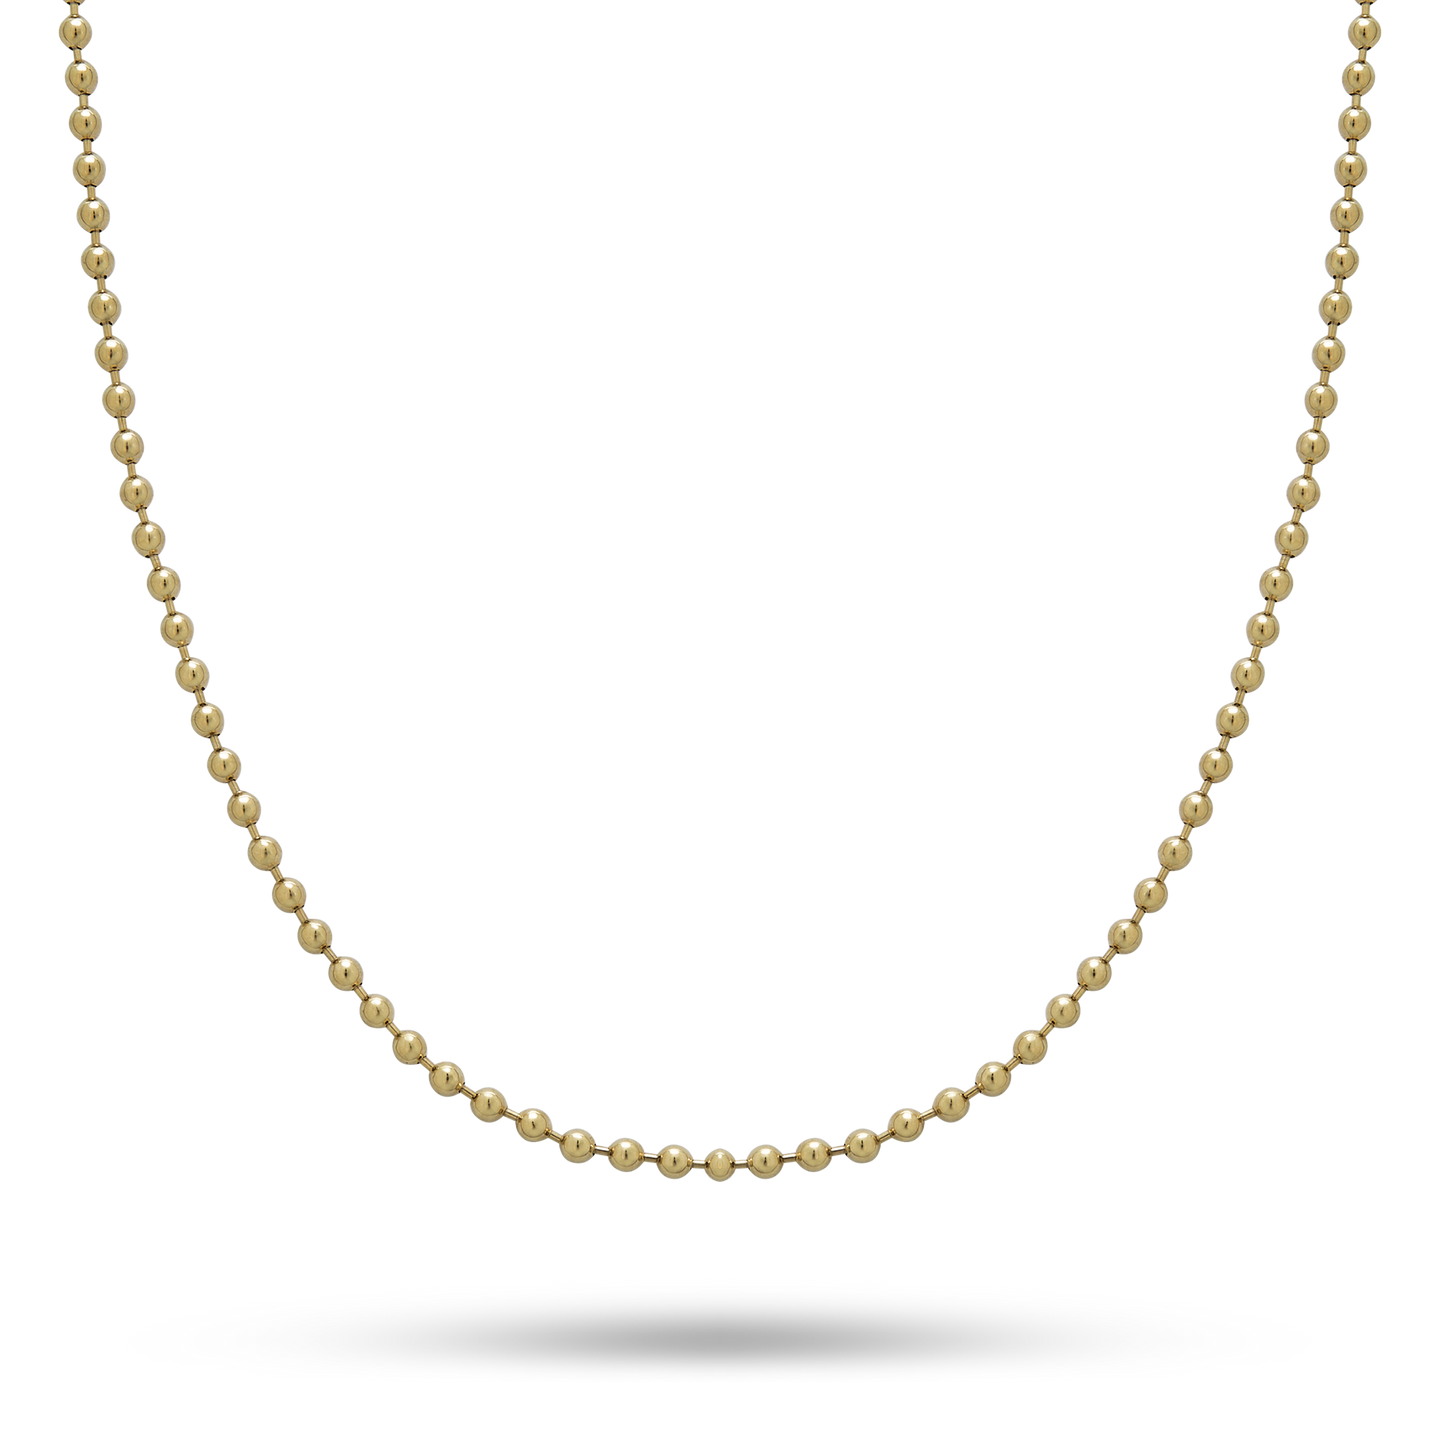 Stone and Strand Bold Bead Chain Necklace